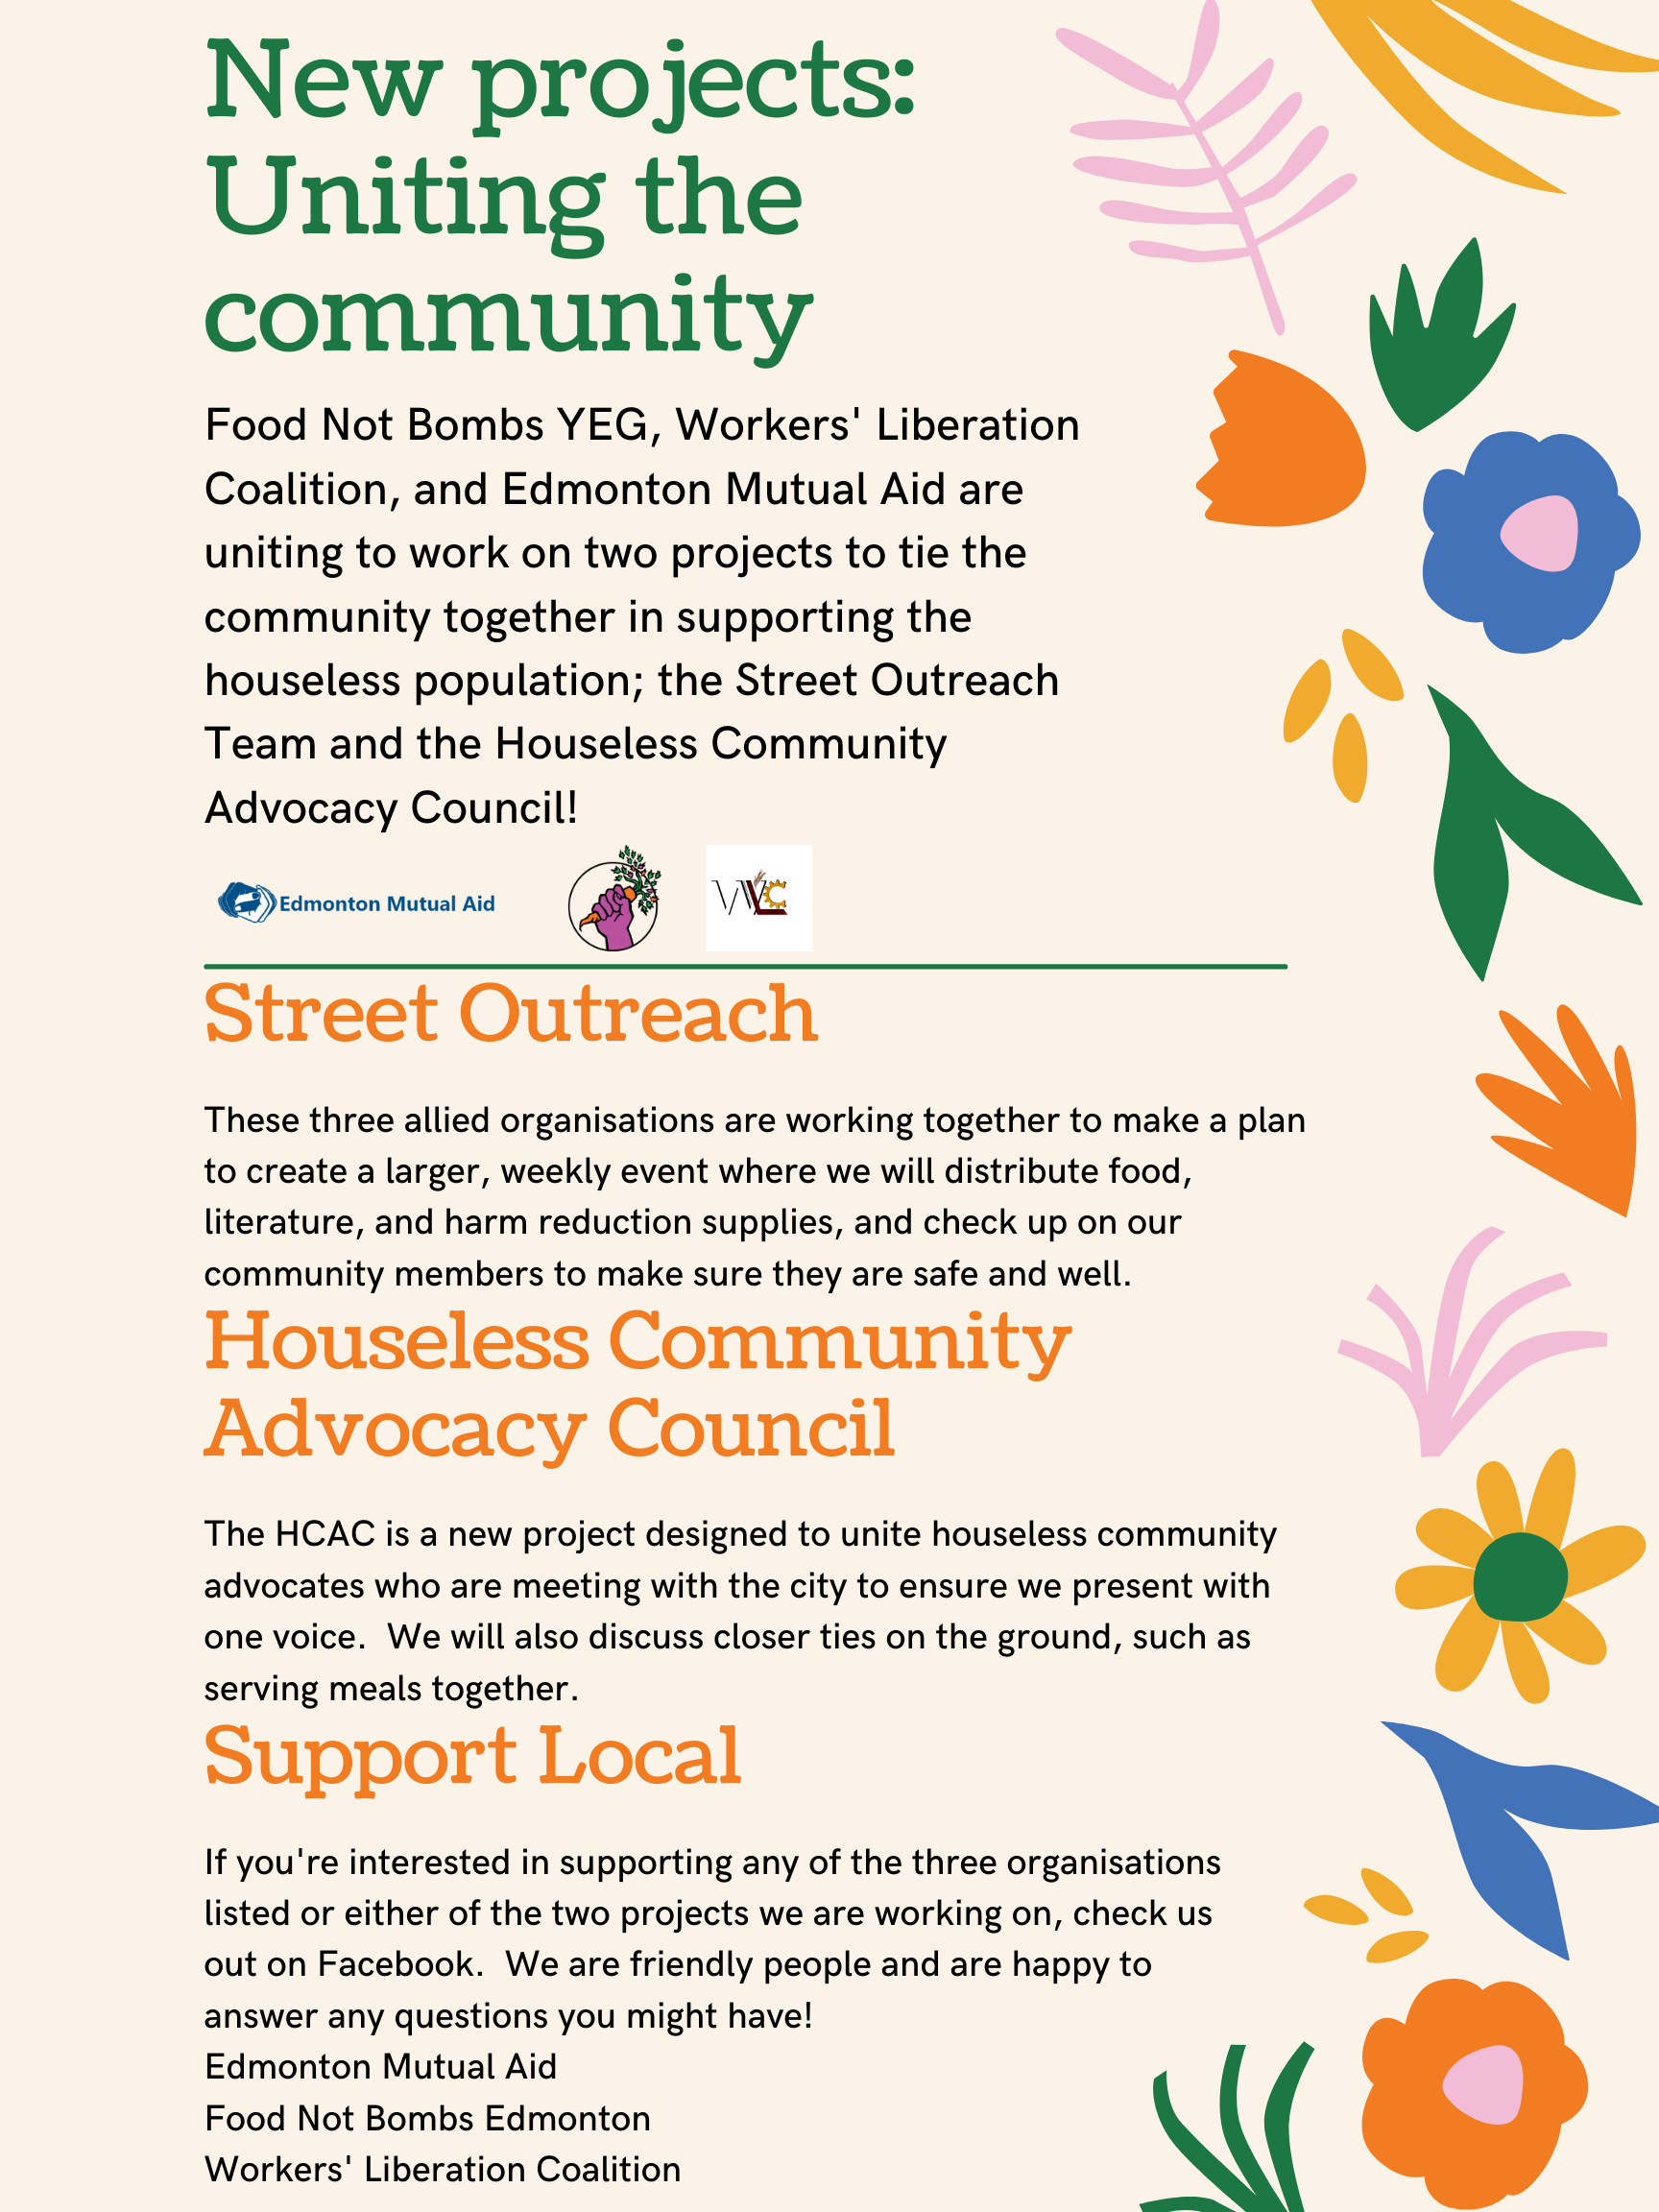 Poster with the following text:
New projects: Uniting the community.

Food Not Bombs YEG, Worker's Liberation Coalition, and Edmonton Mutual Aid are uniting to work on two projects to tie the community together in supporting the houseless population; the Street Outreach Team and Houseless Community Advocacy Council!

Street Outreach
These three allied organizations are working together to make a plan to create a larger, weekly event where we will distribute food, literature, and harm reduction supplies, and check up on our community members to make sure they are safe and well.

Houseless Community Advocacy Council
The HCAC is a new project designed to unite houseless community advocates who are meeting with the city to ensure we present with one voice. We will also discuss closer ties on the ground, such as serving meals together.

Support Local.
If you're interested in supporting any of the three organizations listed or either of the two projects we are working on, check us out on Facebook. We are friendly people and are happy to answer any questions you might have!
Edmonton Mutual Aid
Food Not Bombs Edmonton
Workers' Liberation Coalition